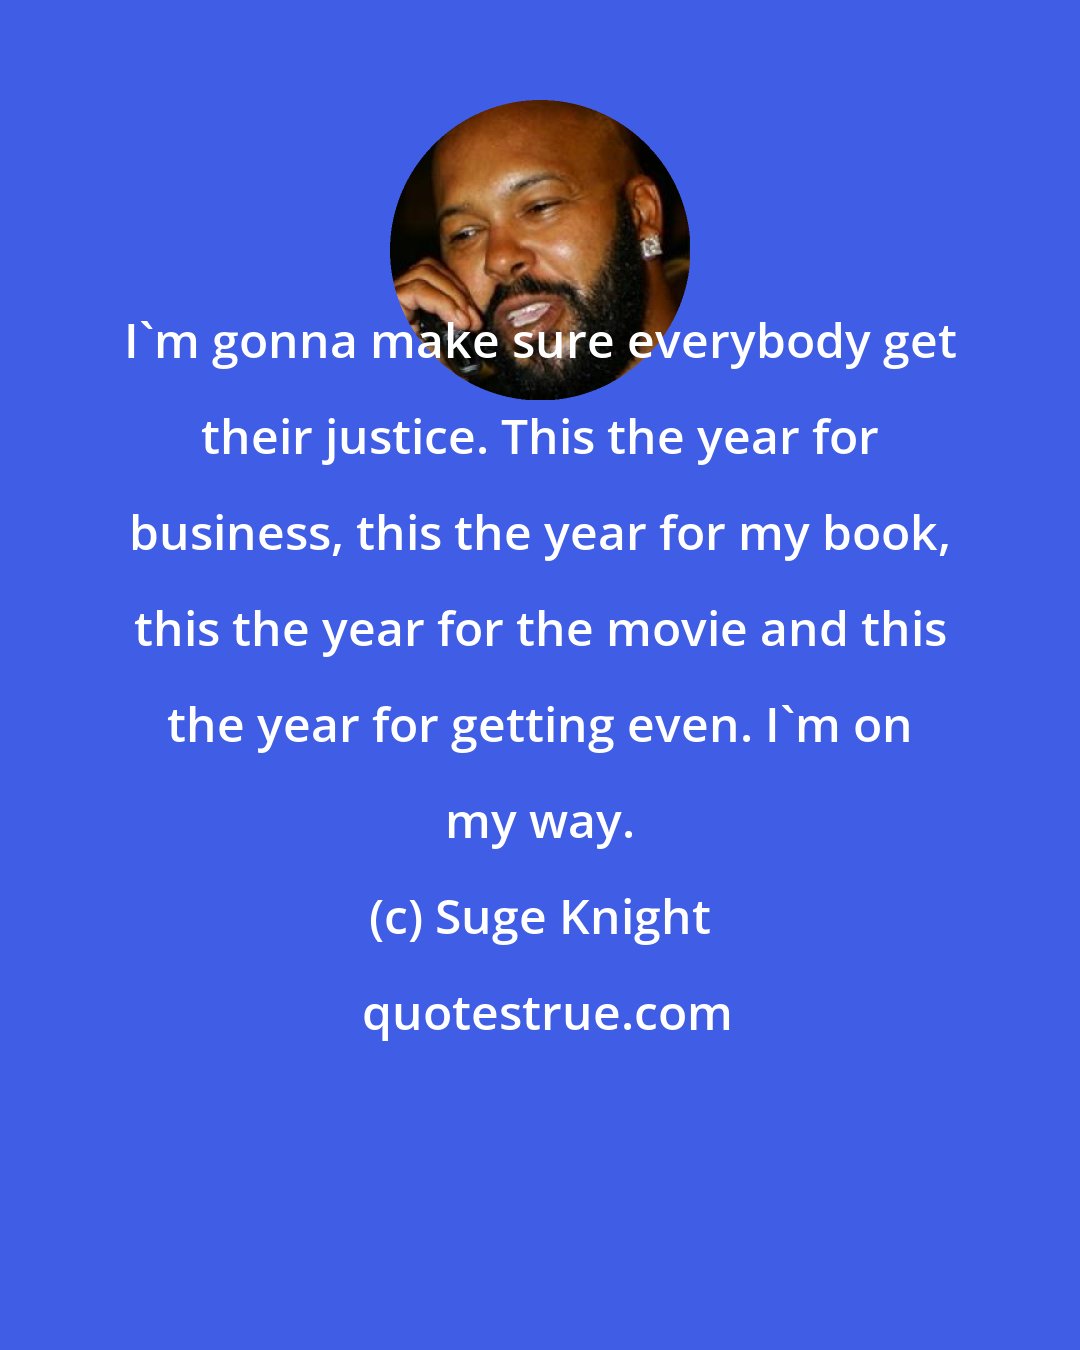 Suge Knight: I'm gonna make sure everybody get their justice. This the year for business, this the year for my book, this the year for the movie and this the year for getting even. I'm on my way.